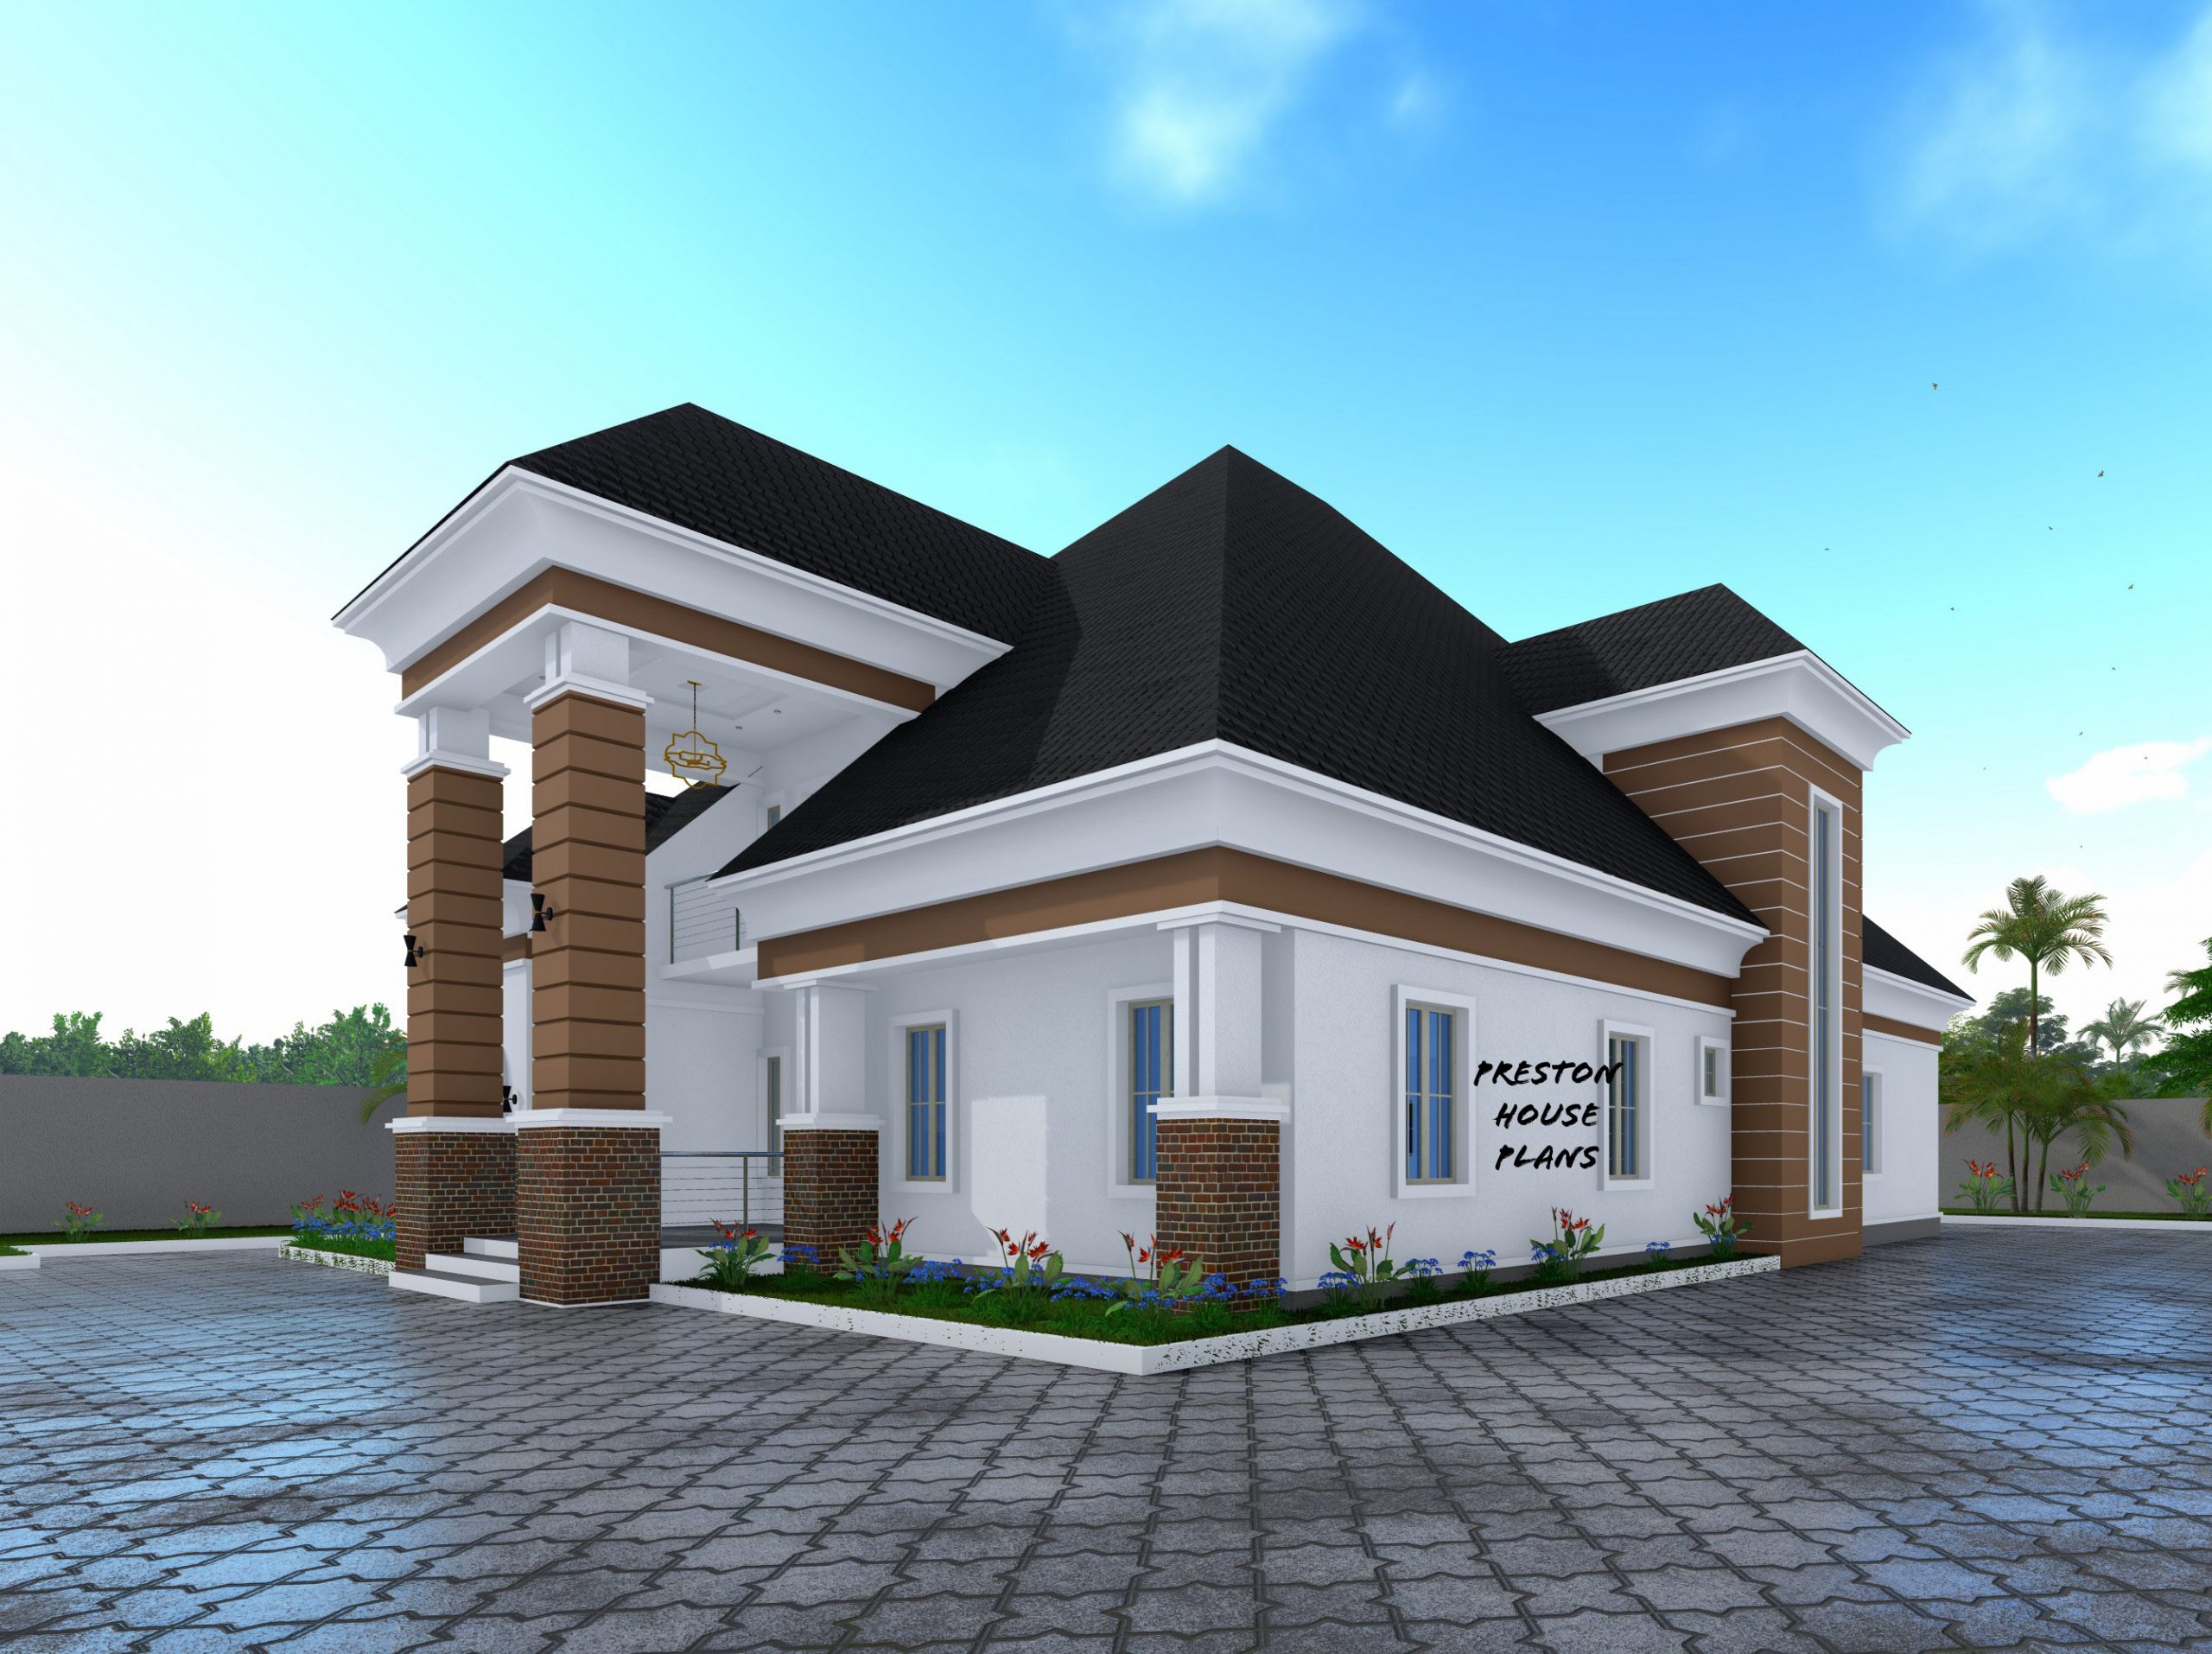 5 bedroom bungalow with a penthouse